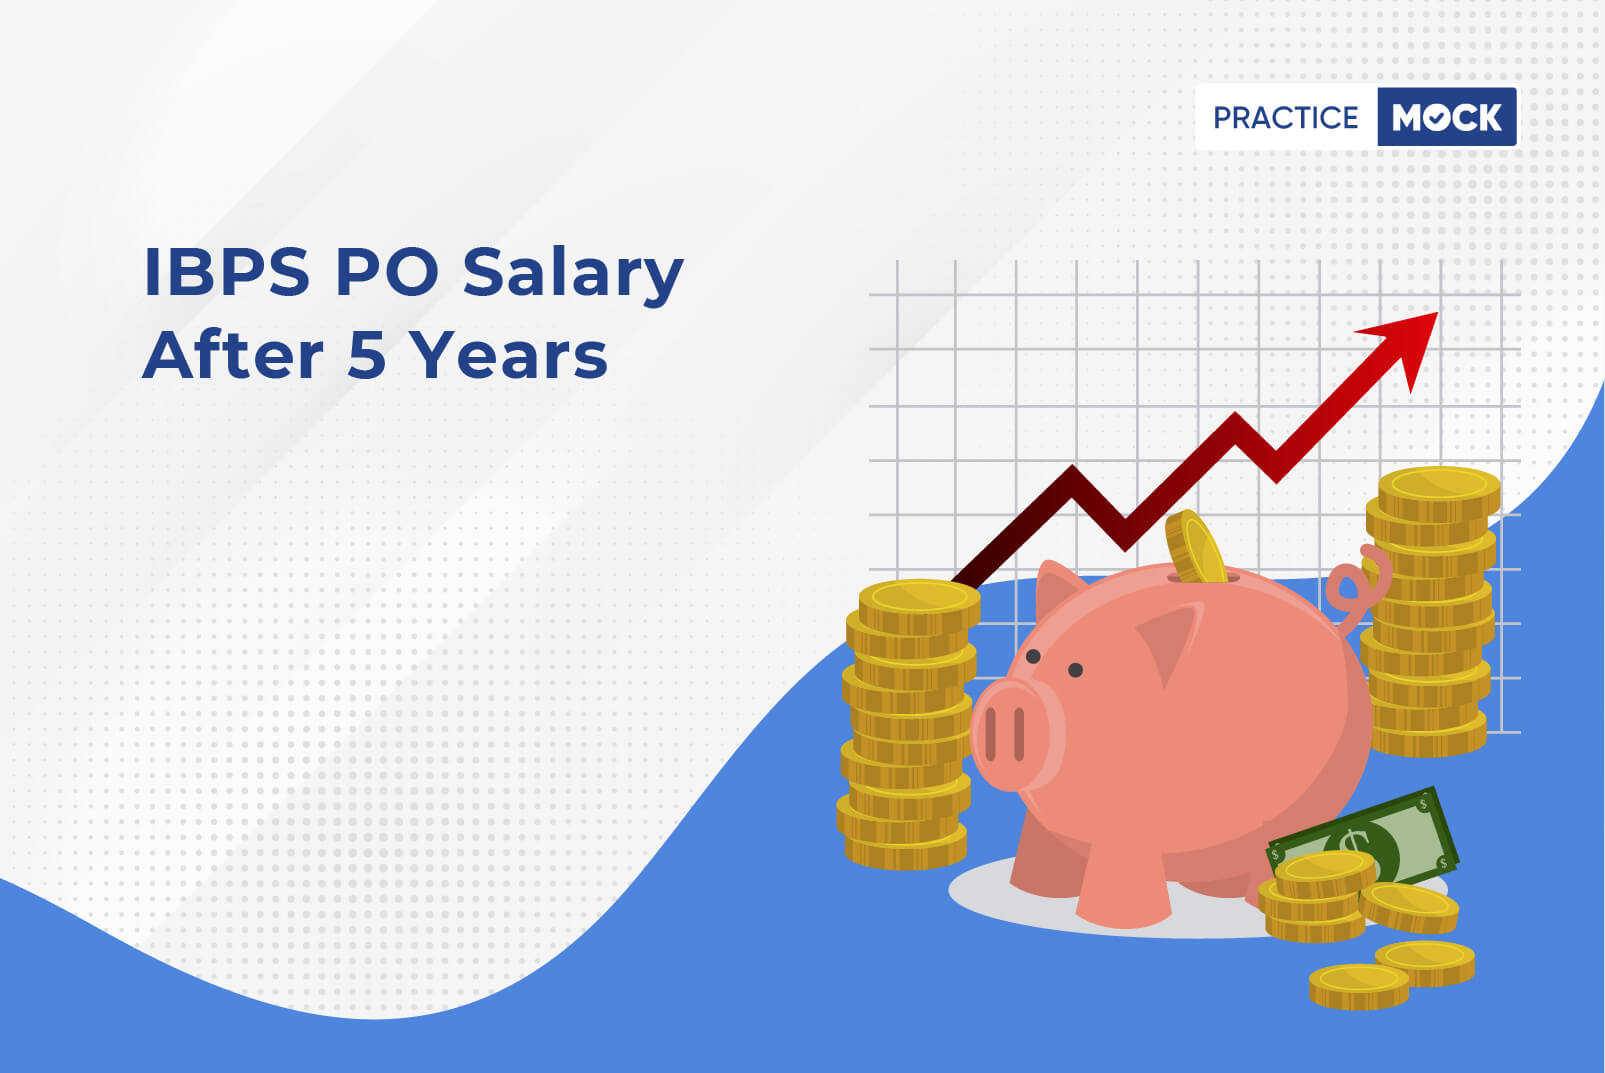 IBPS PO Salary After 5 Years